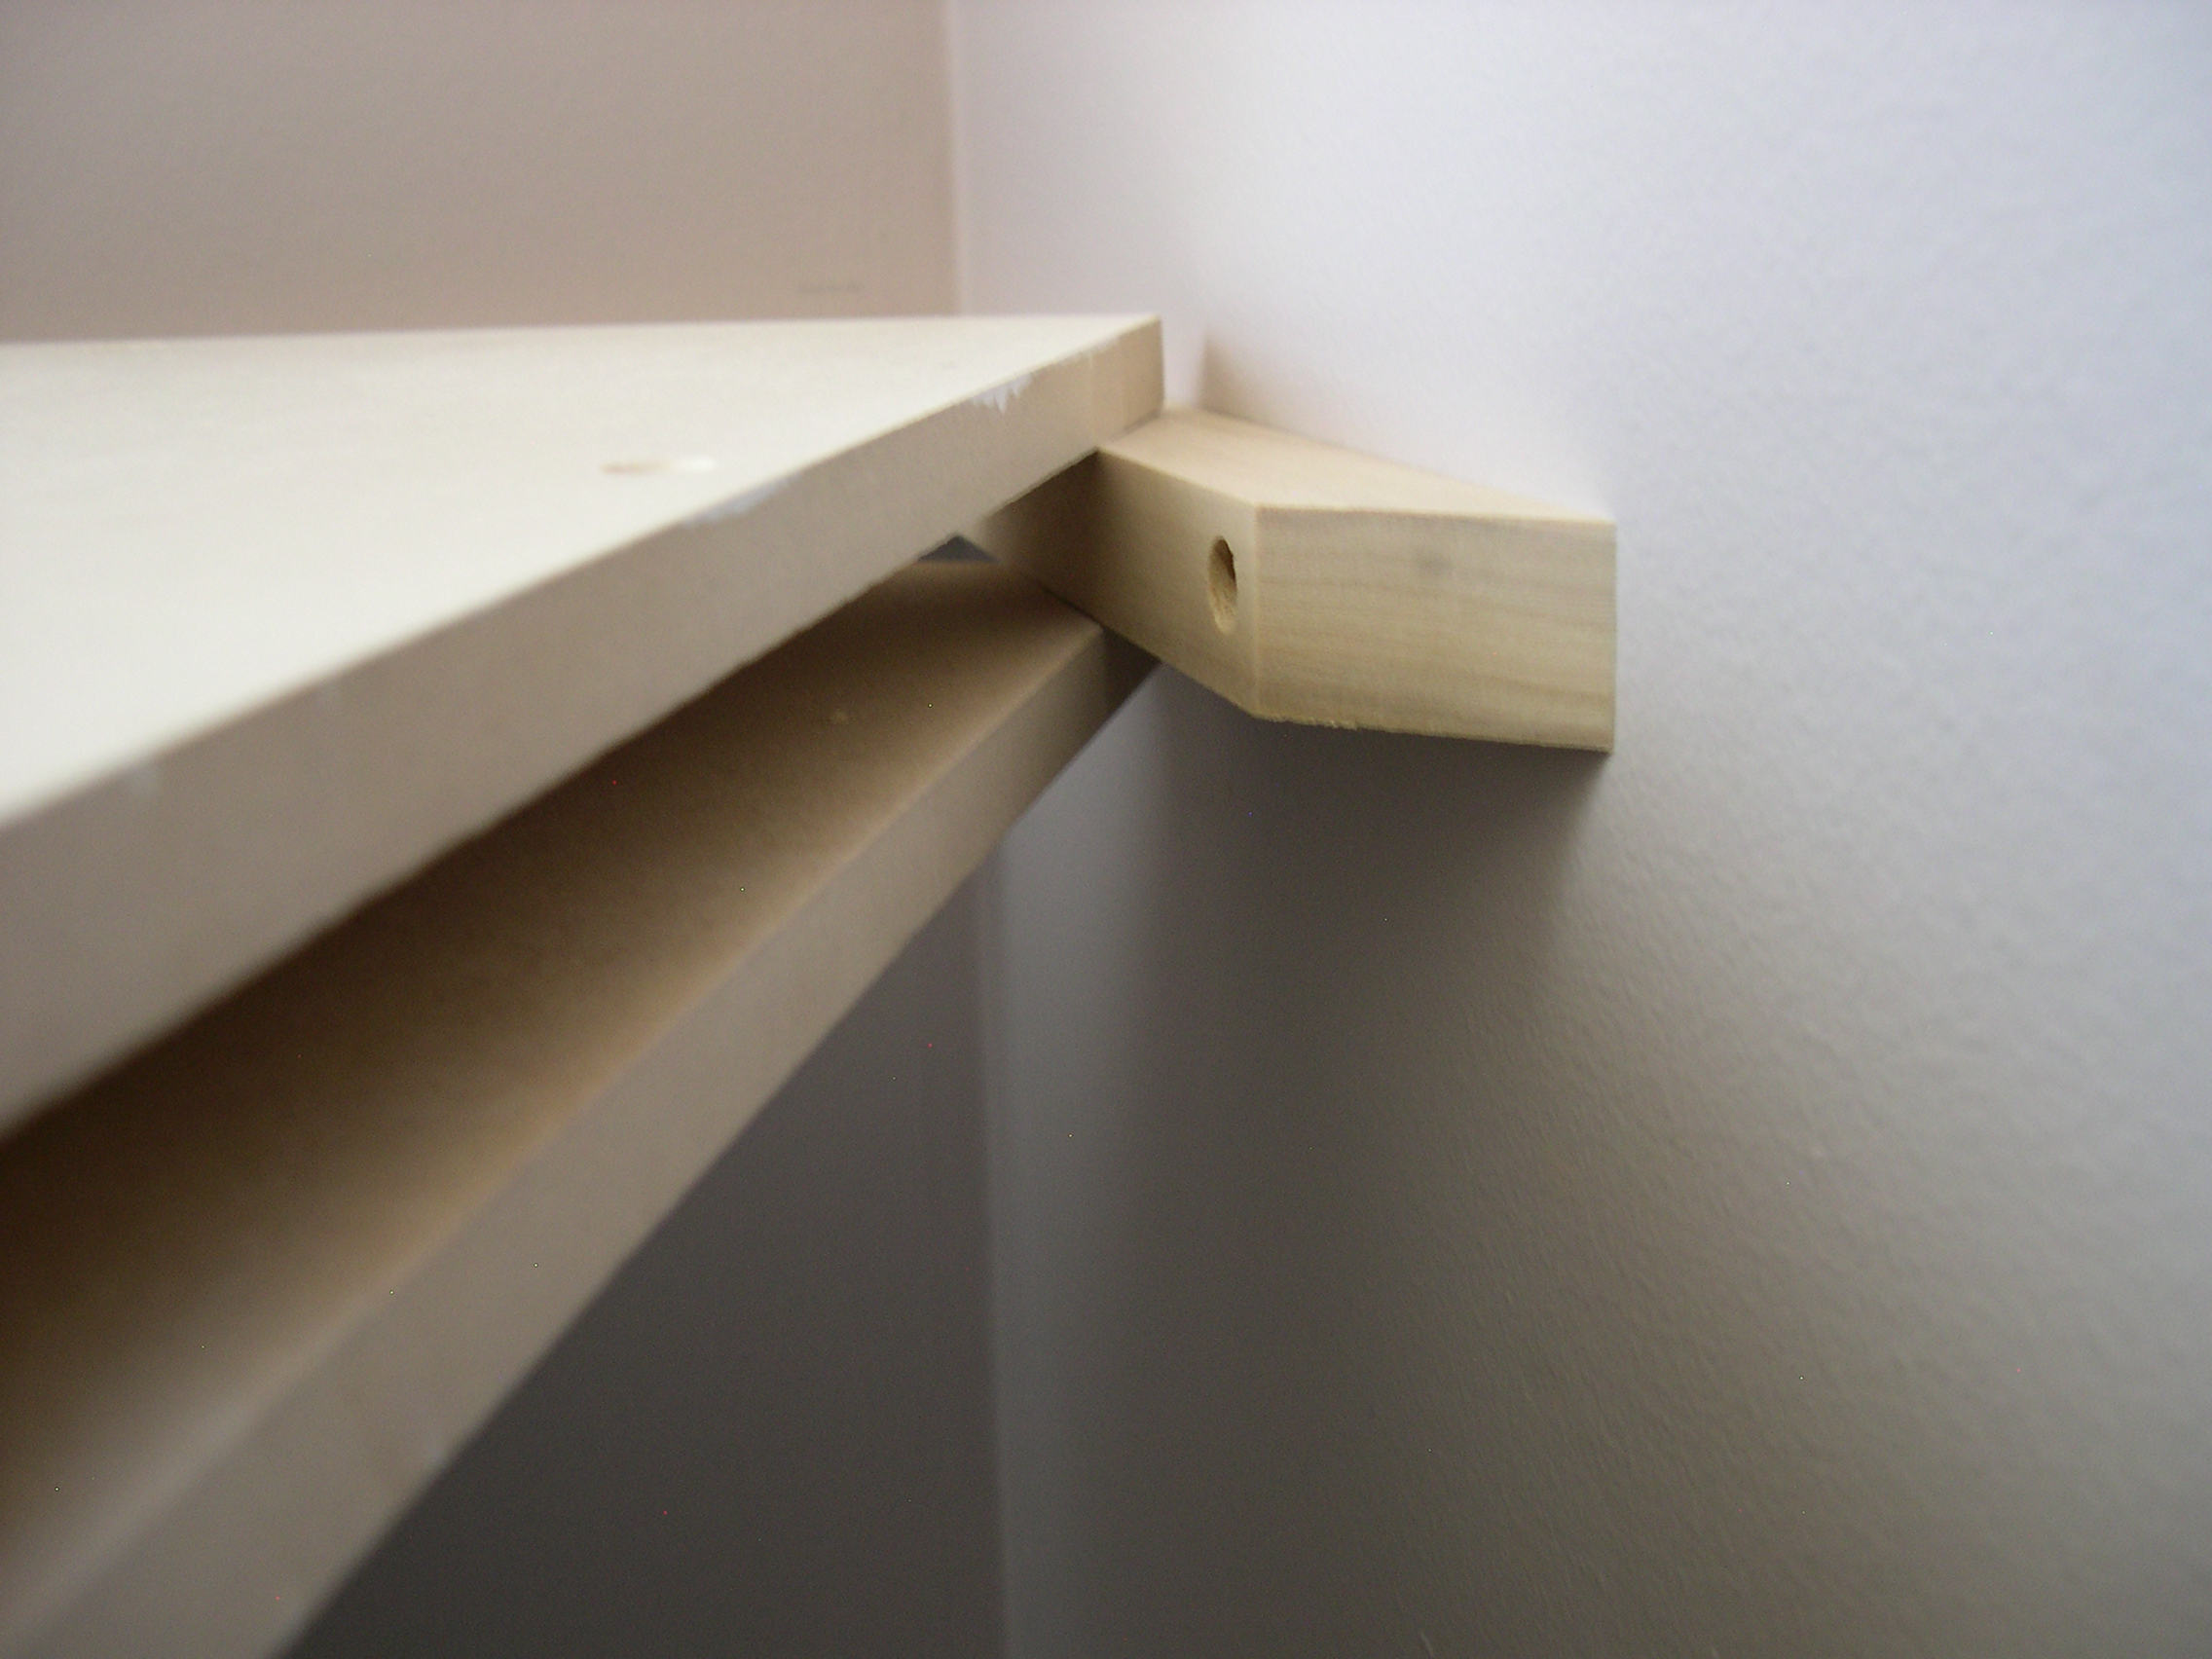 How to hang a Floating Shelf